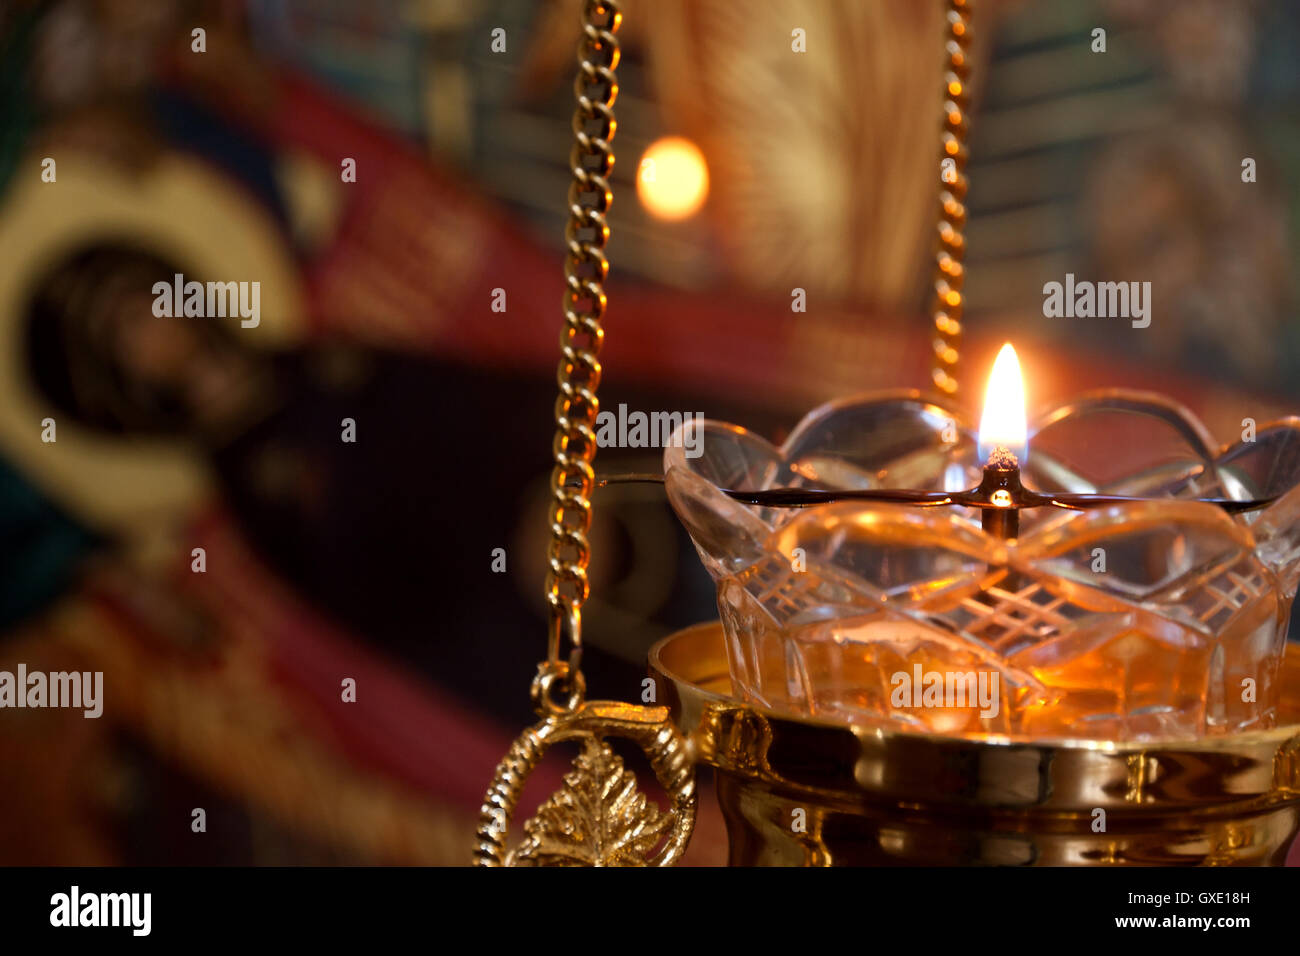 Russian orthodox church interior detail: alight icon lamp with blurred icons as a background. Stock Photo